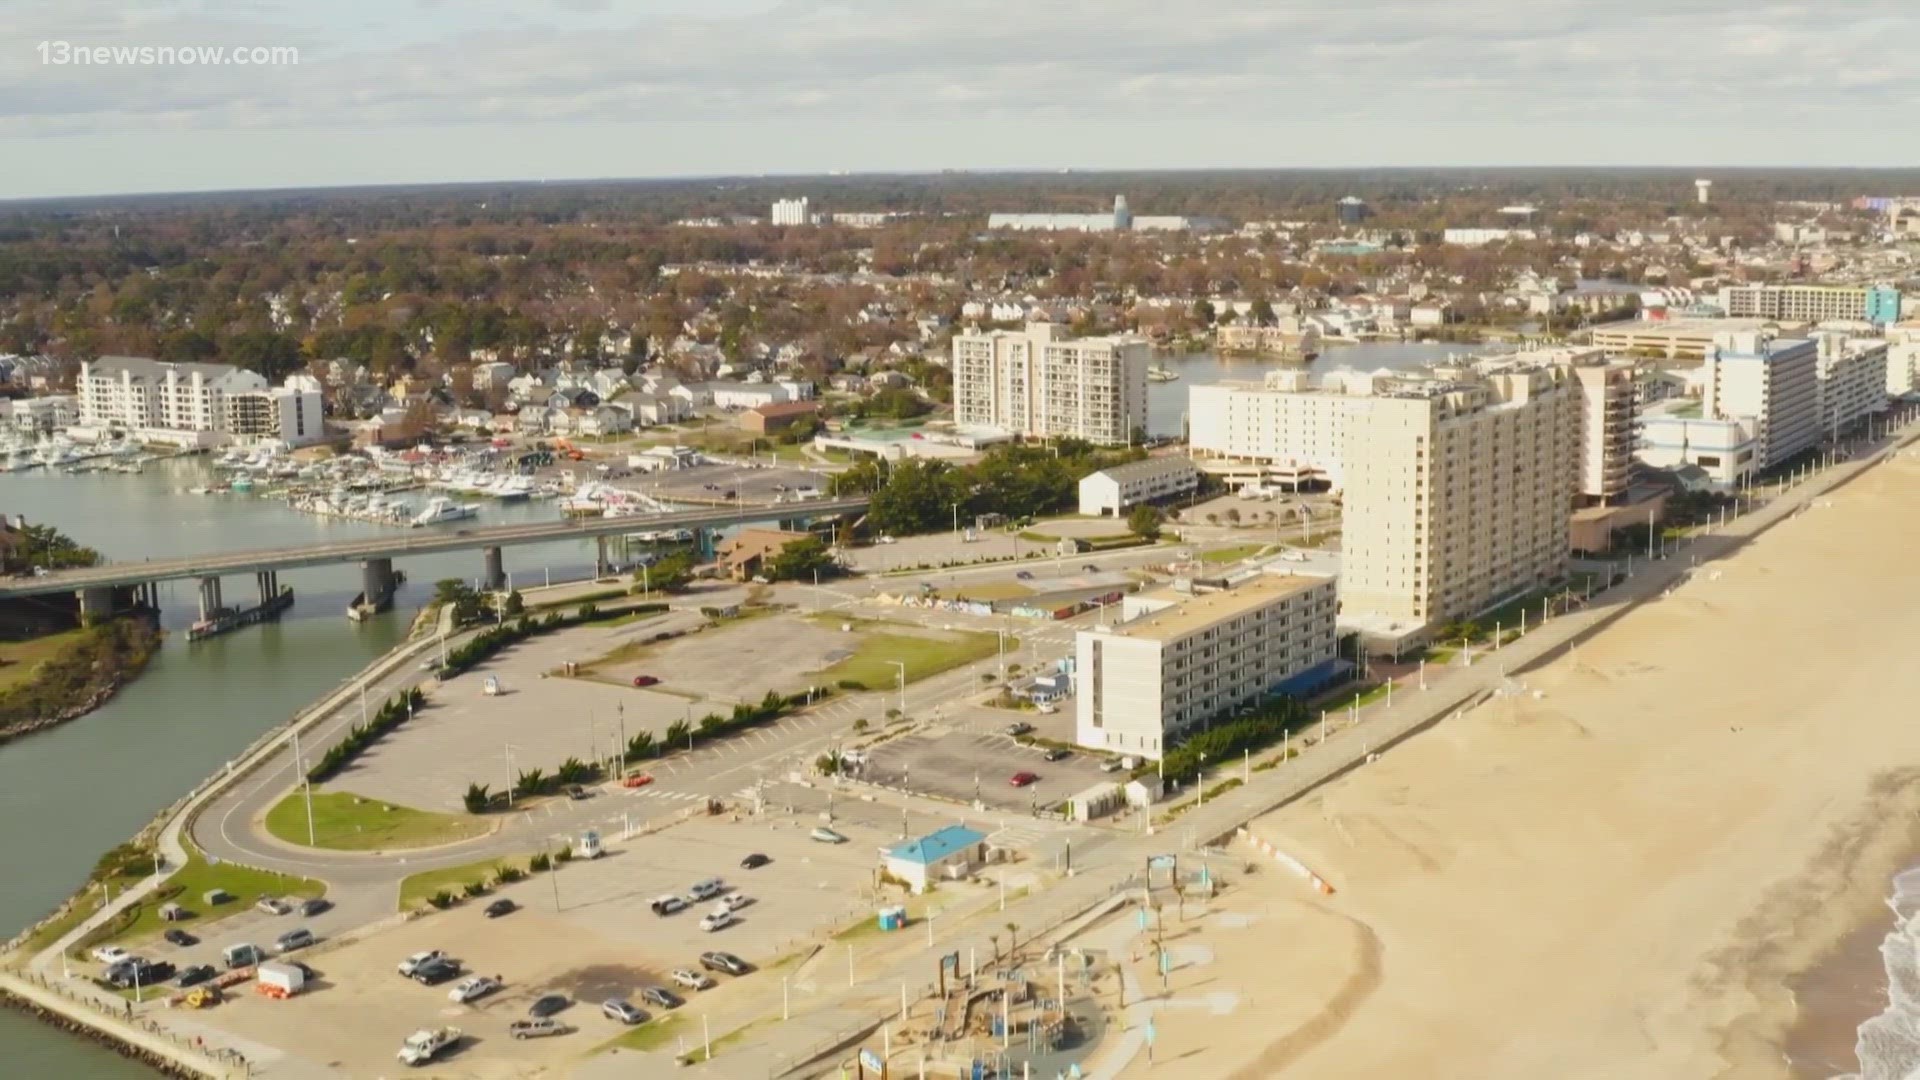 A survey revealed that 60% of people preferred Virginia Beach Parks and REc's plan to include a park, fishing pier, playground, food truck plaza, etc to Rudee Loop.